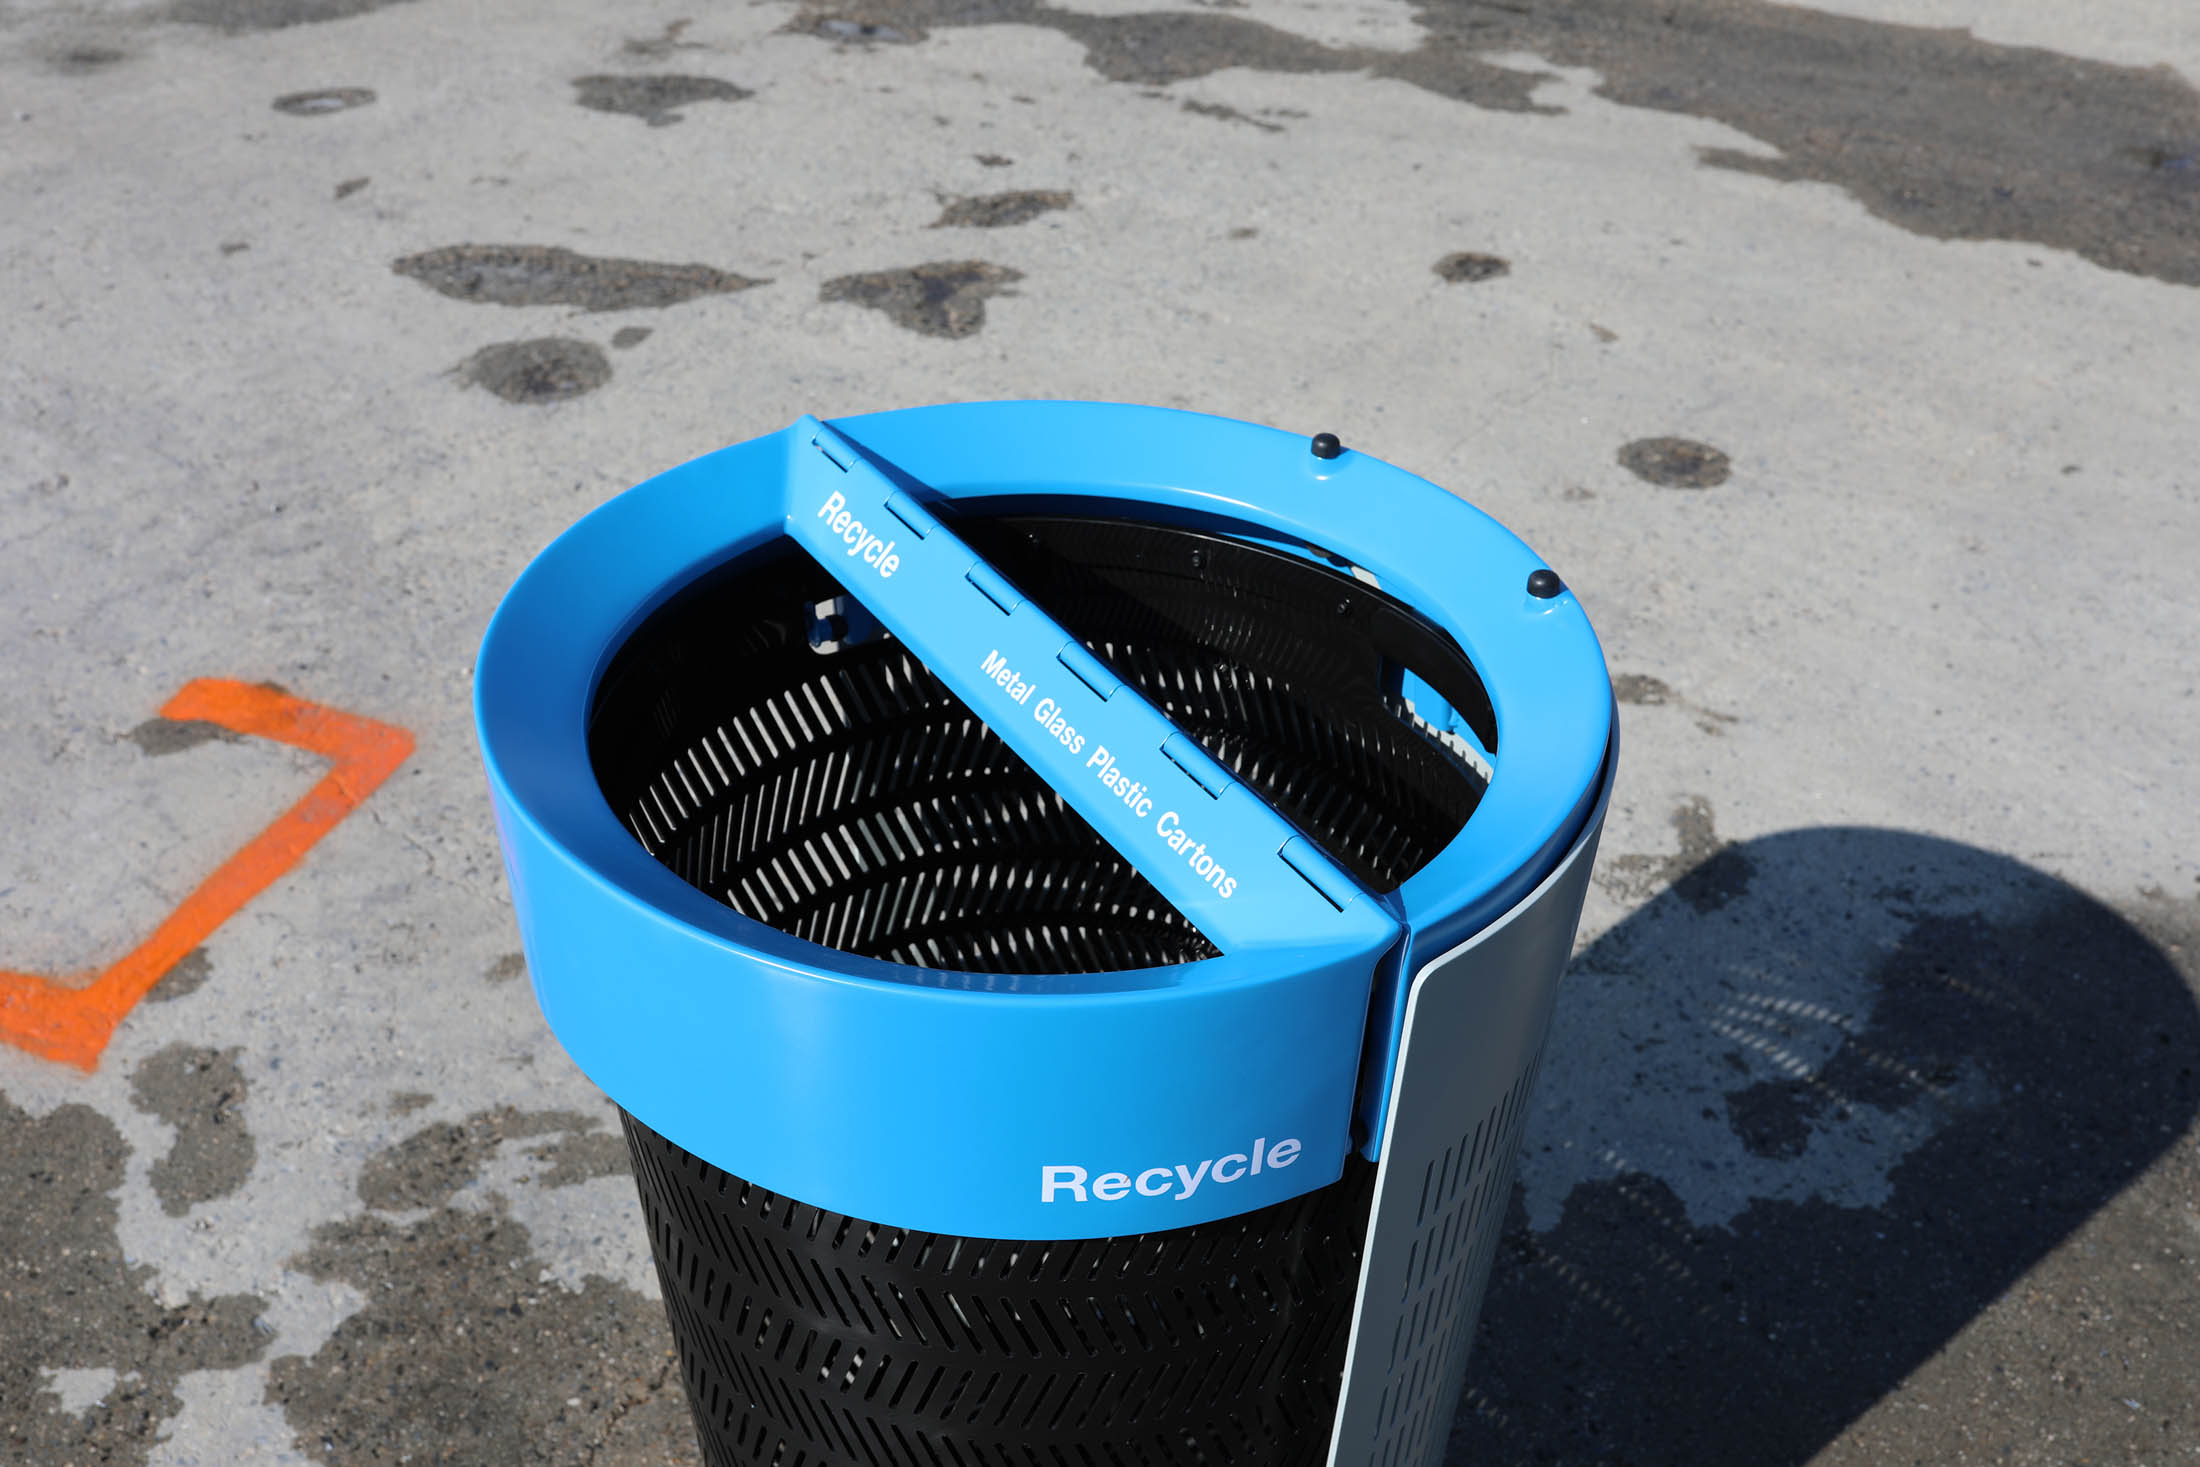 Trash Cans Replaced On Main Street For Better Containment - At No Cost To  City — A Little Beacon Blog